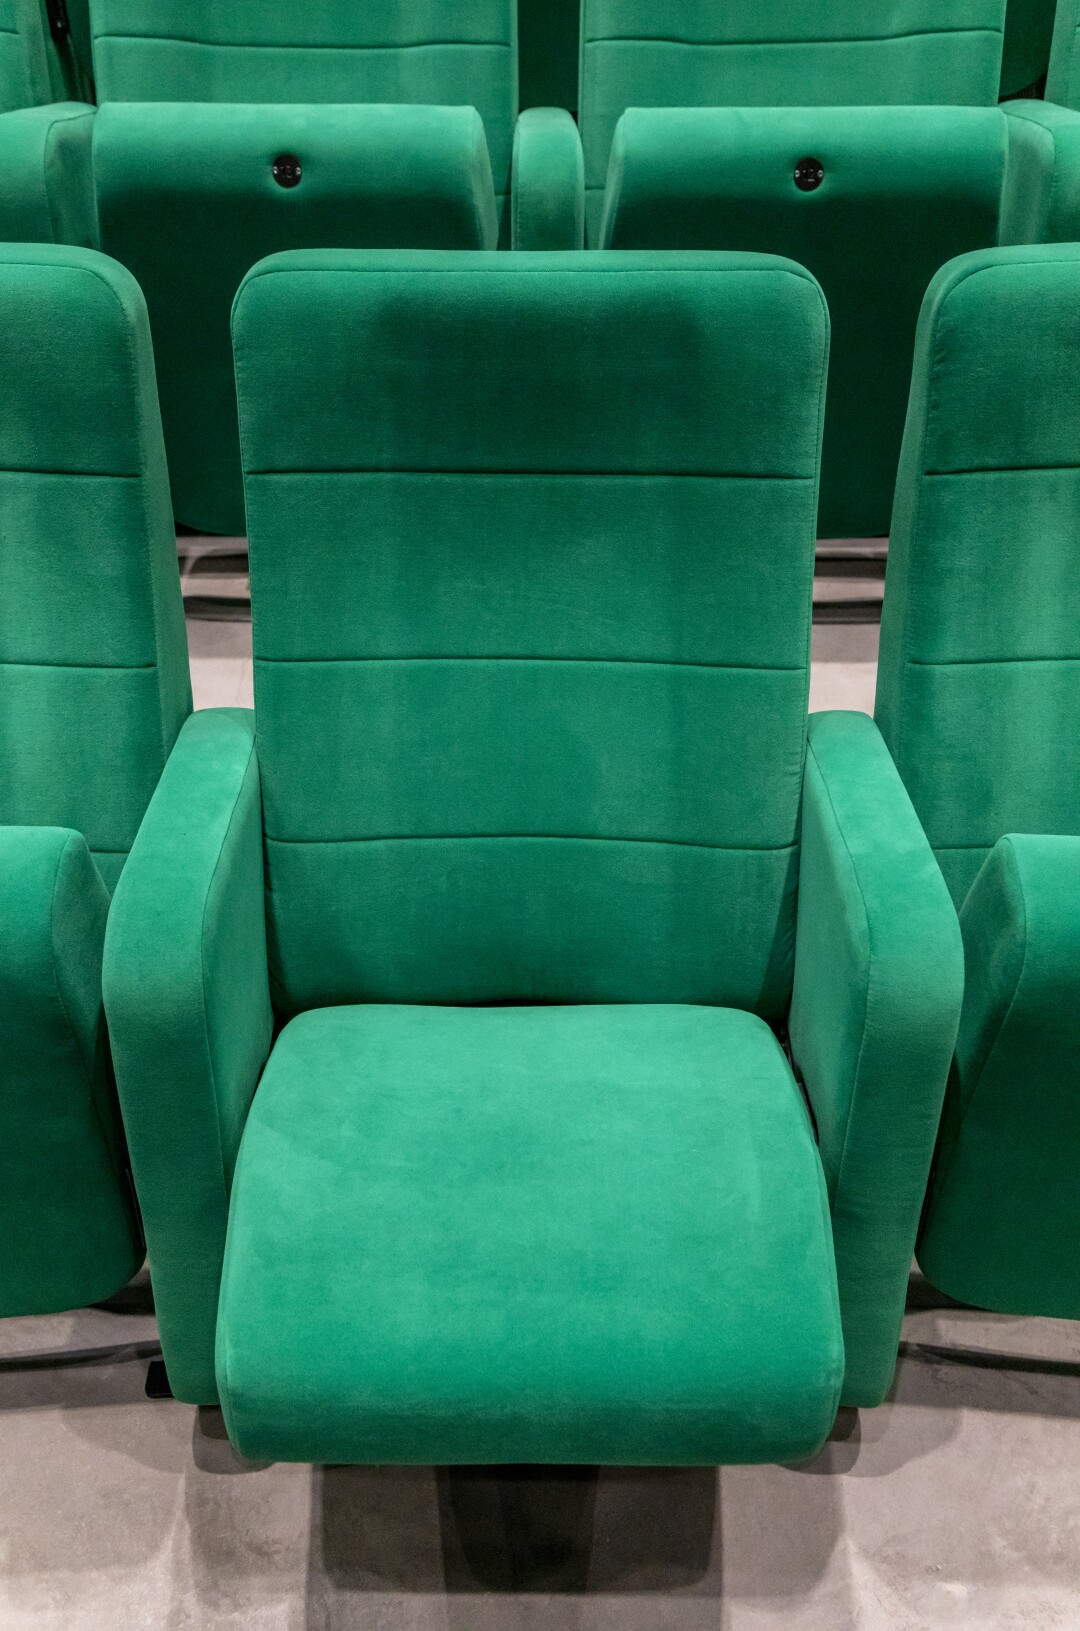  Green seat in Ted Mann Theater at the new Academy Museum of Motion Pictures. 